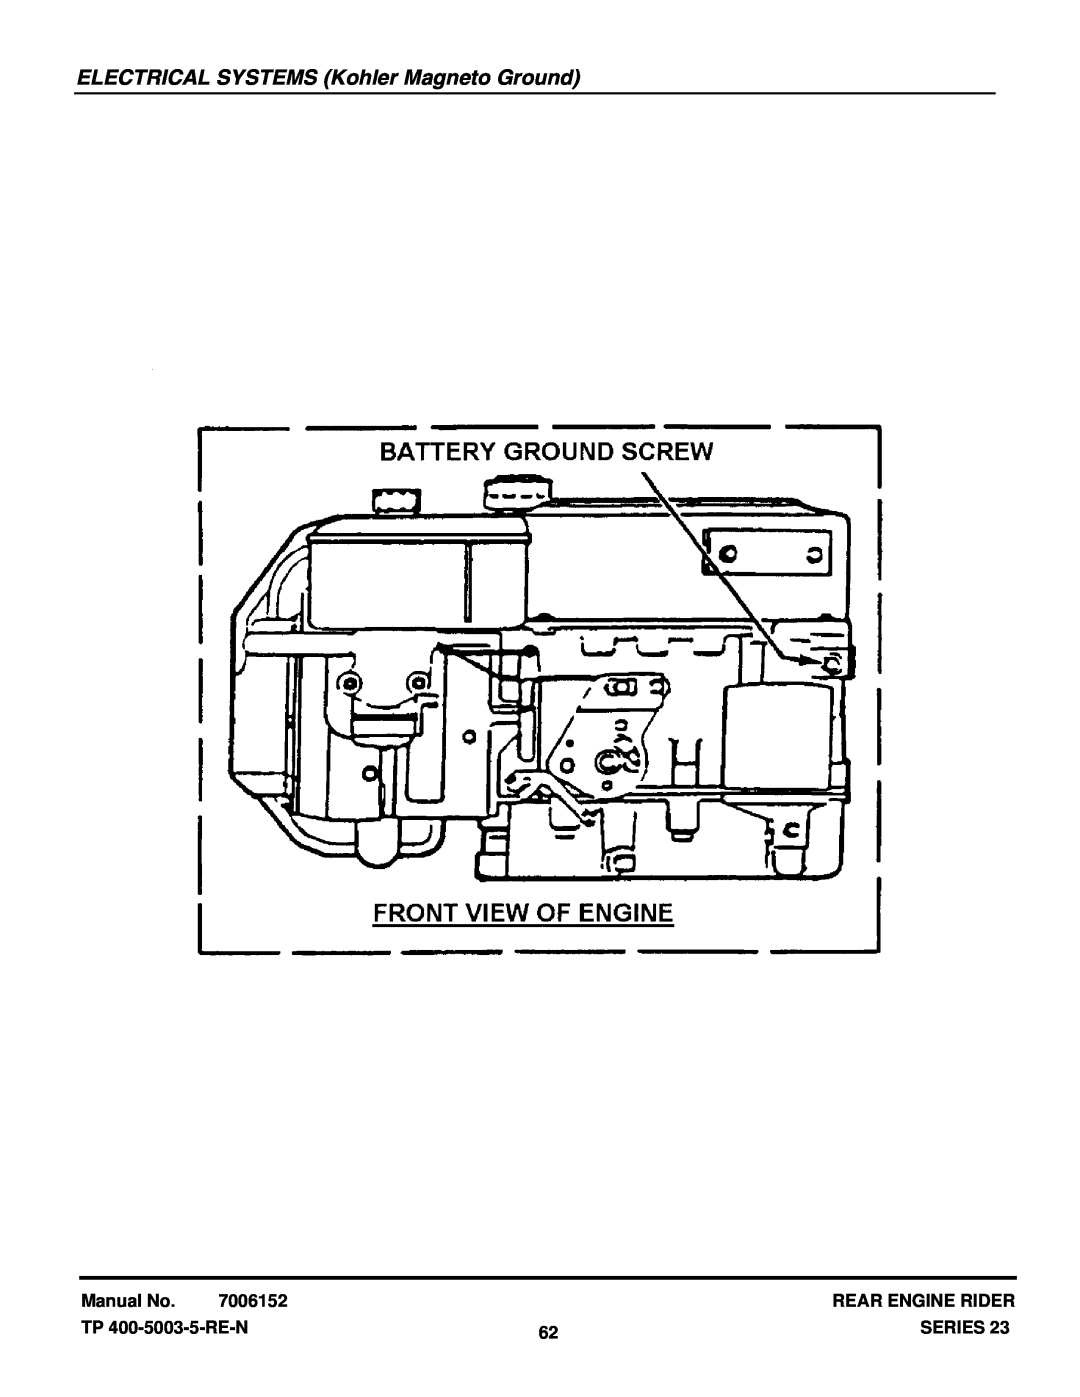 Snapper 281223BVE (85622) manual ELECTRICAL SYSTEMS Kohler Magneto Ground, Manual No, 7006152, Rear Engine Rider, Series 